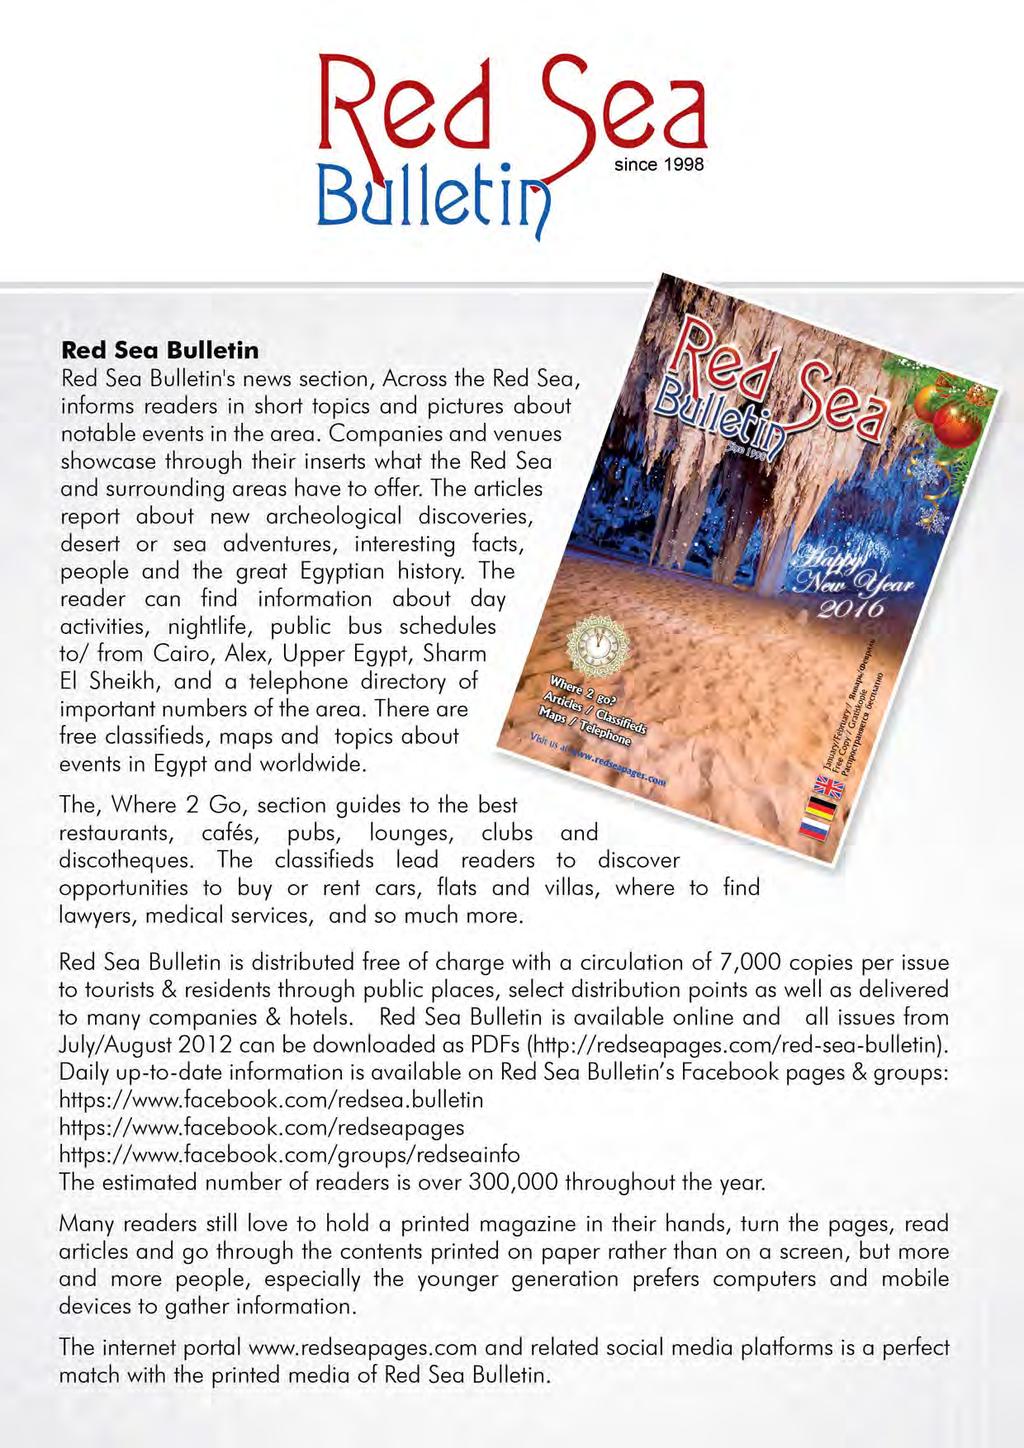 ea since 1998 Red Sea Bulletin Red Sea Bulletin 1 s news section, Across the Red Sea, informs readers in short topics and pictures about notable events in the area.